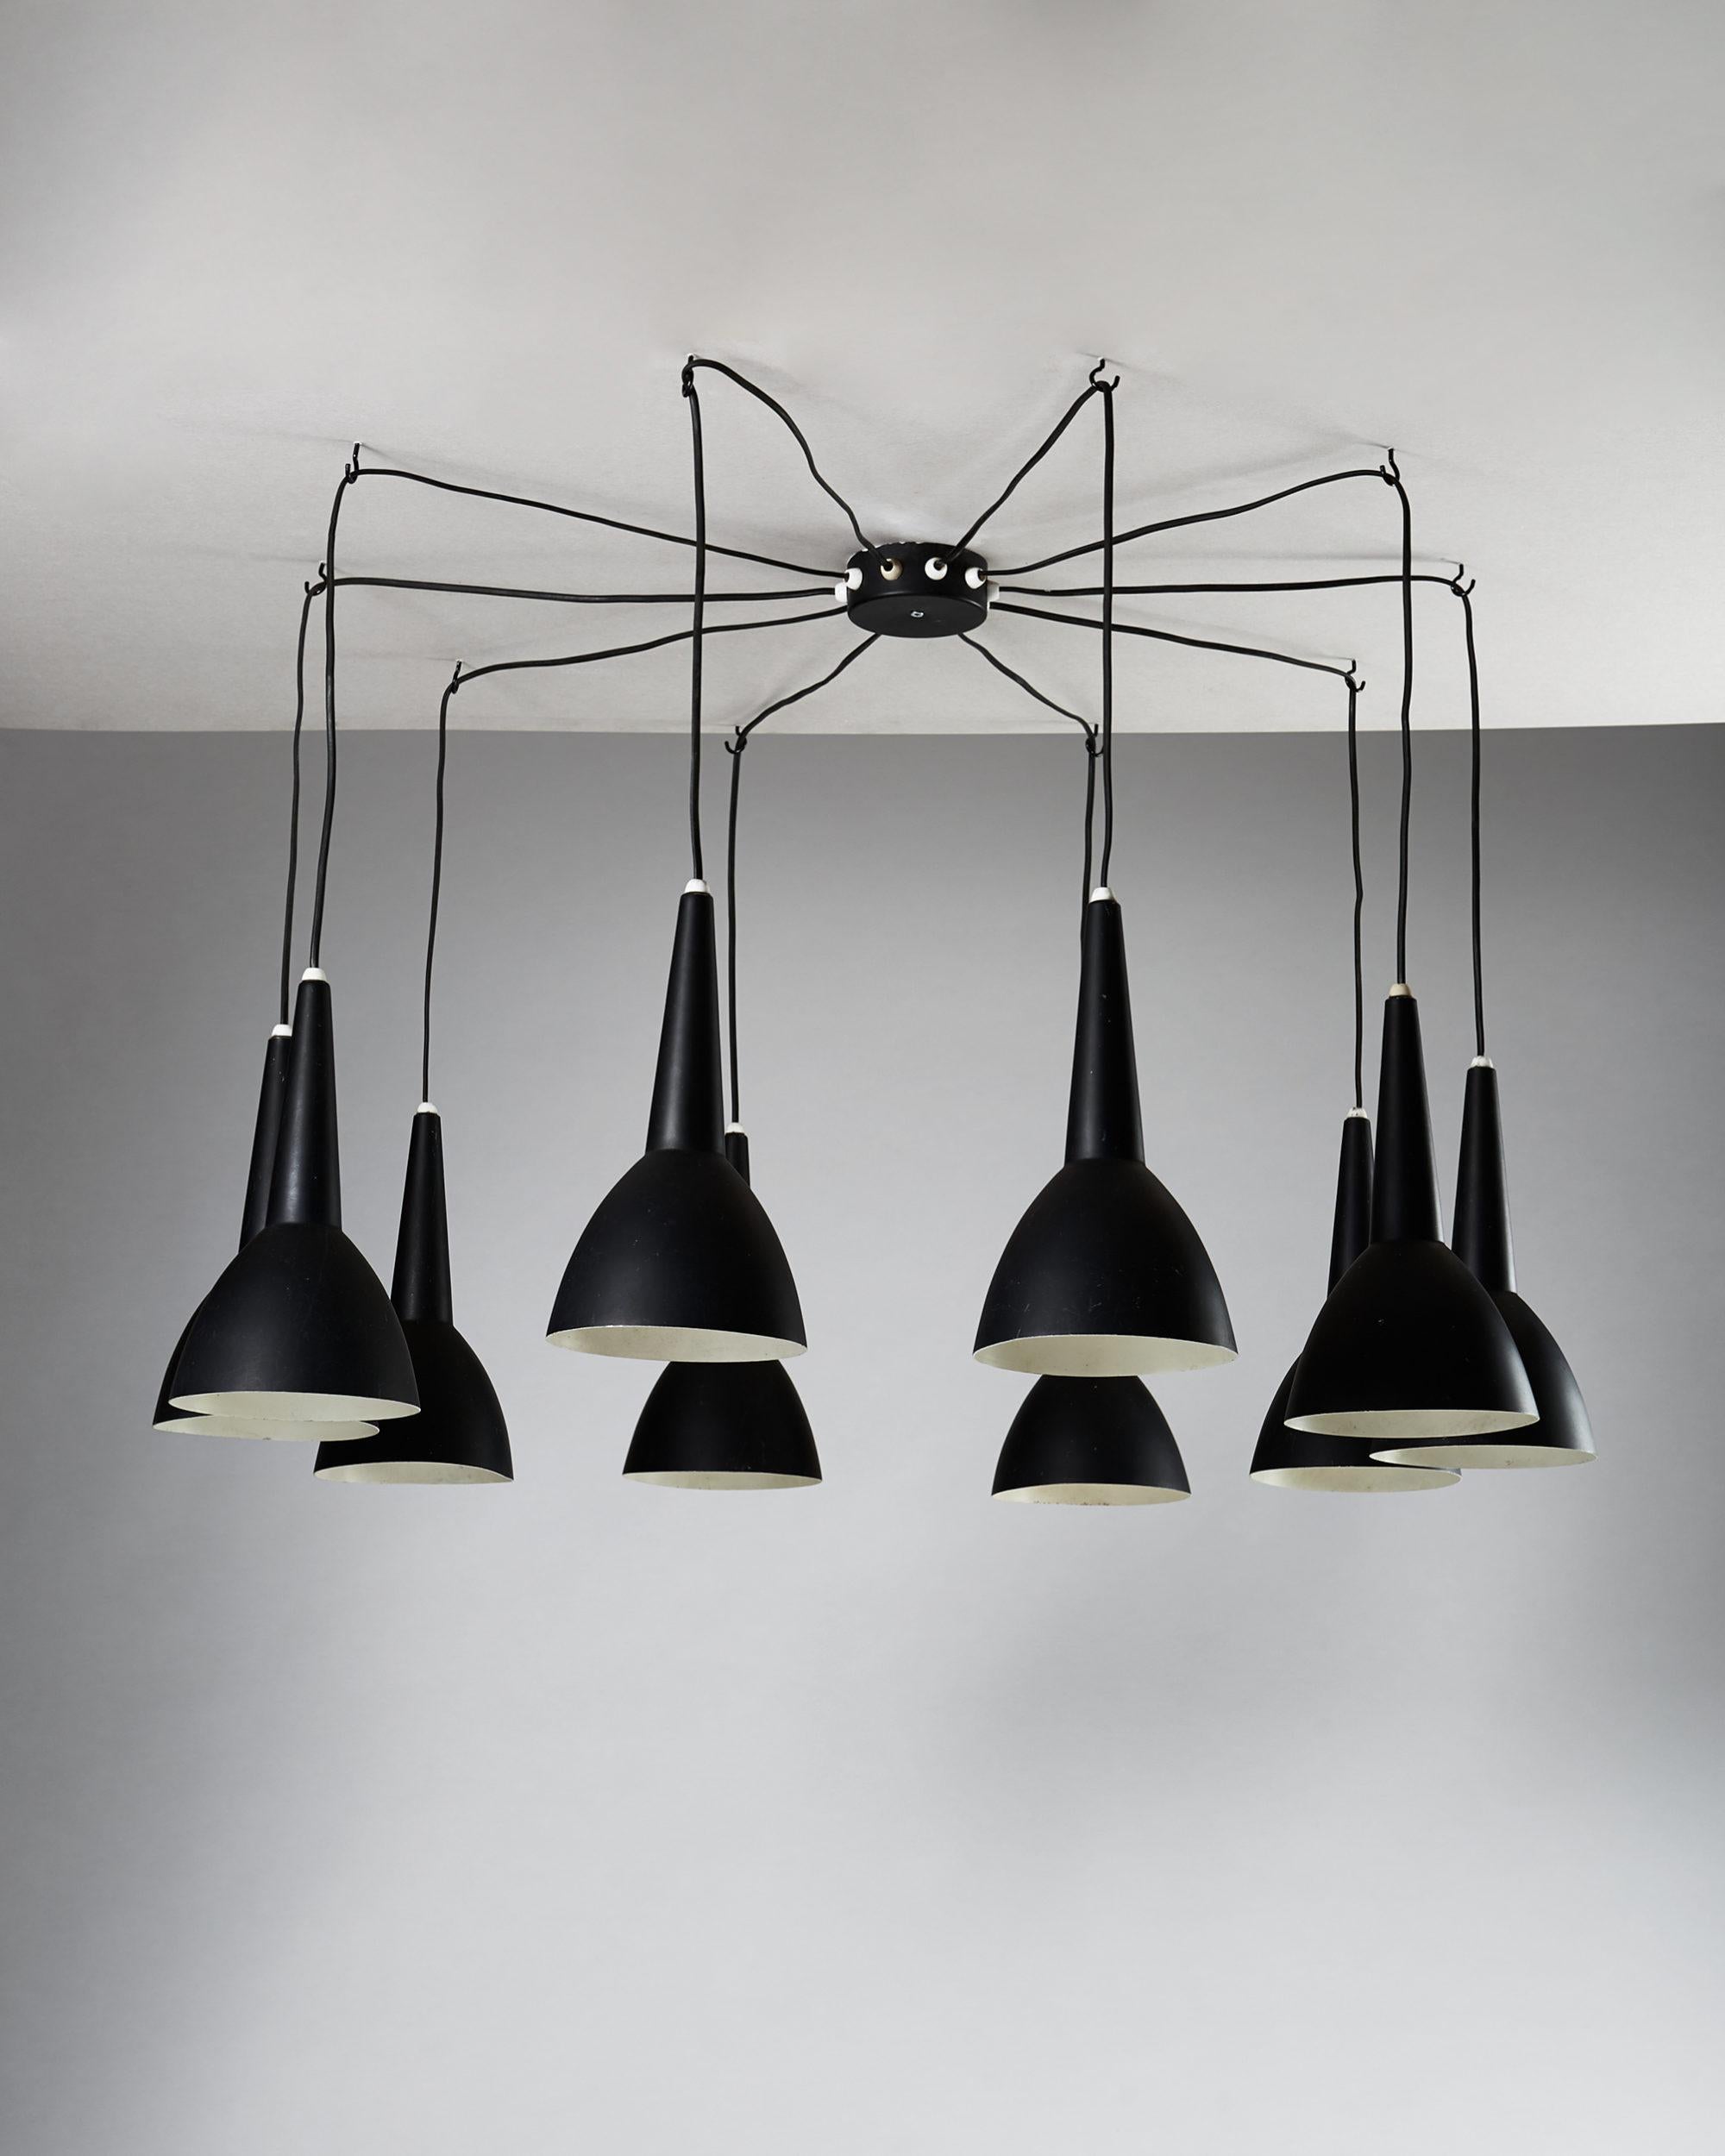 Ceiling lamp designed by Hans-Agne Jakobsson, 
Sweden. 1950s.

Lacquered steel.

Measurements:
Height of each arm: 74 cm/ 2' 5 9/32